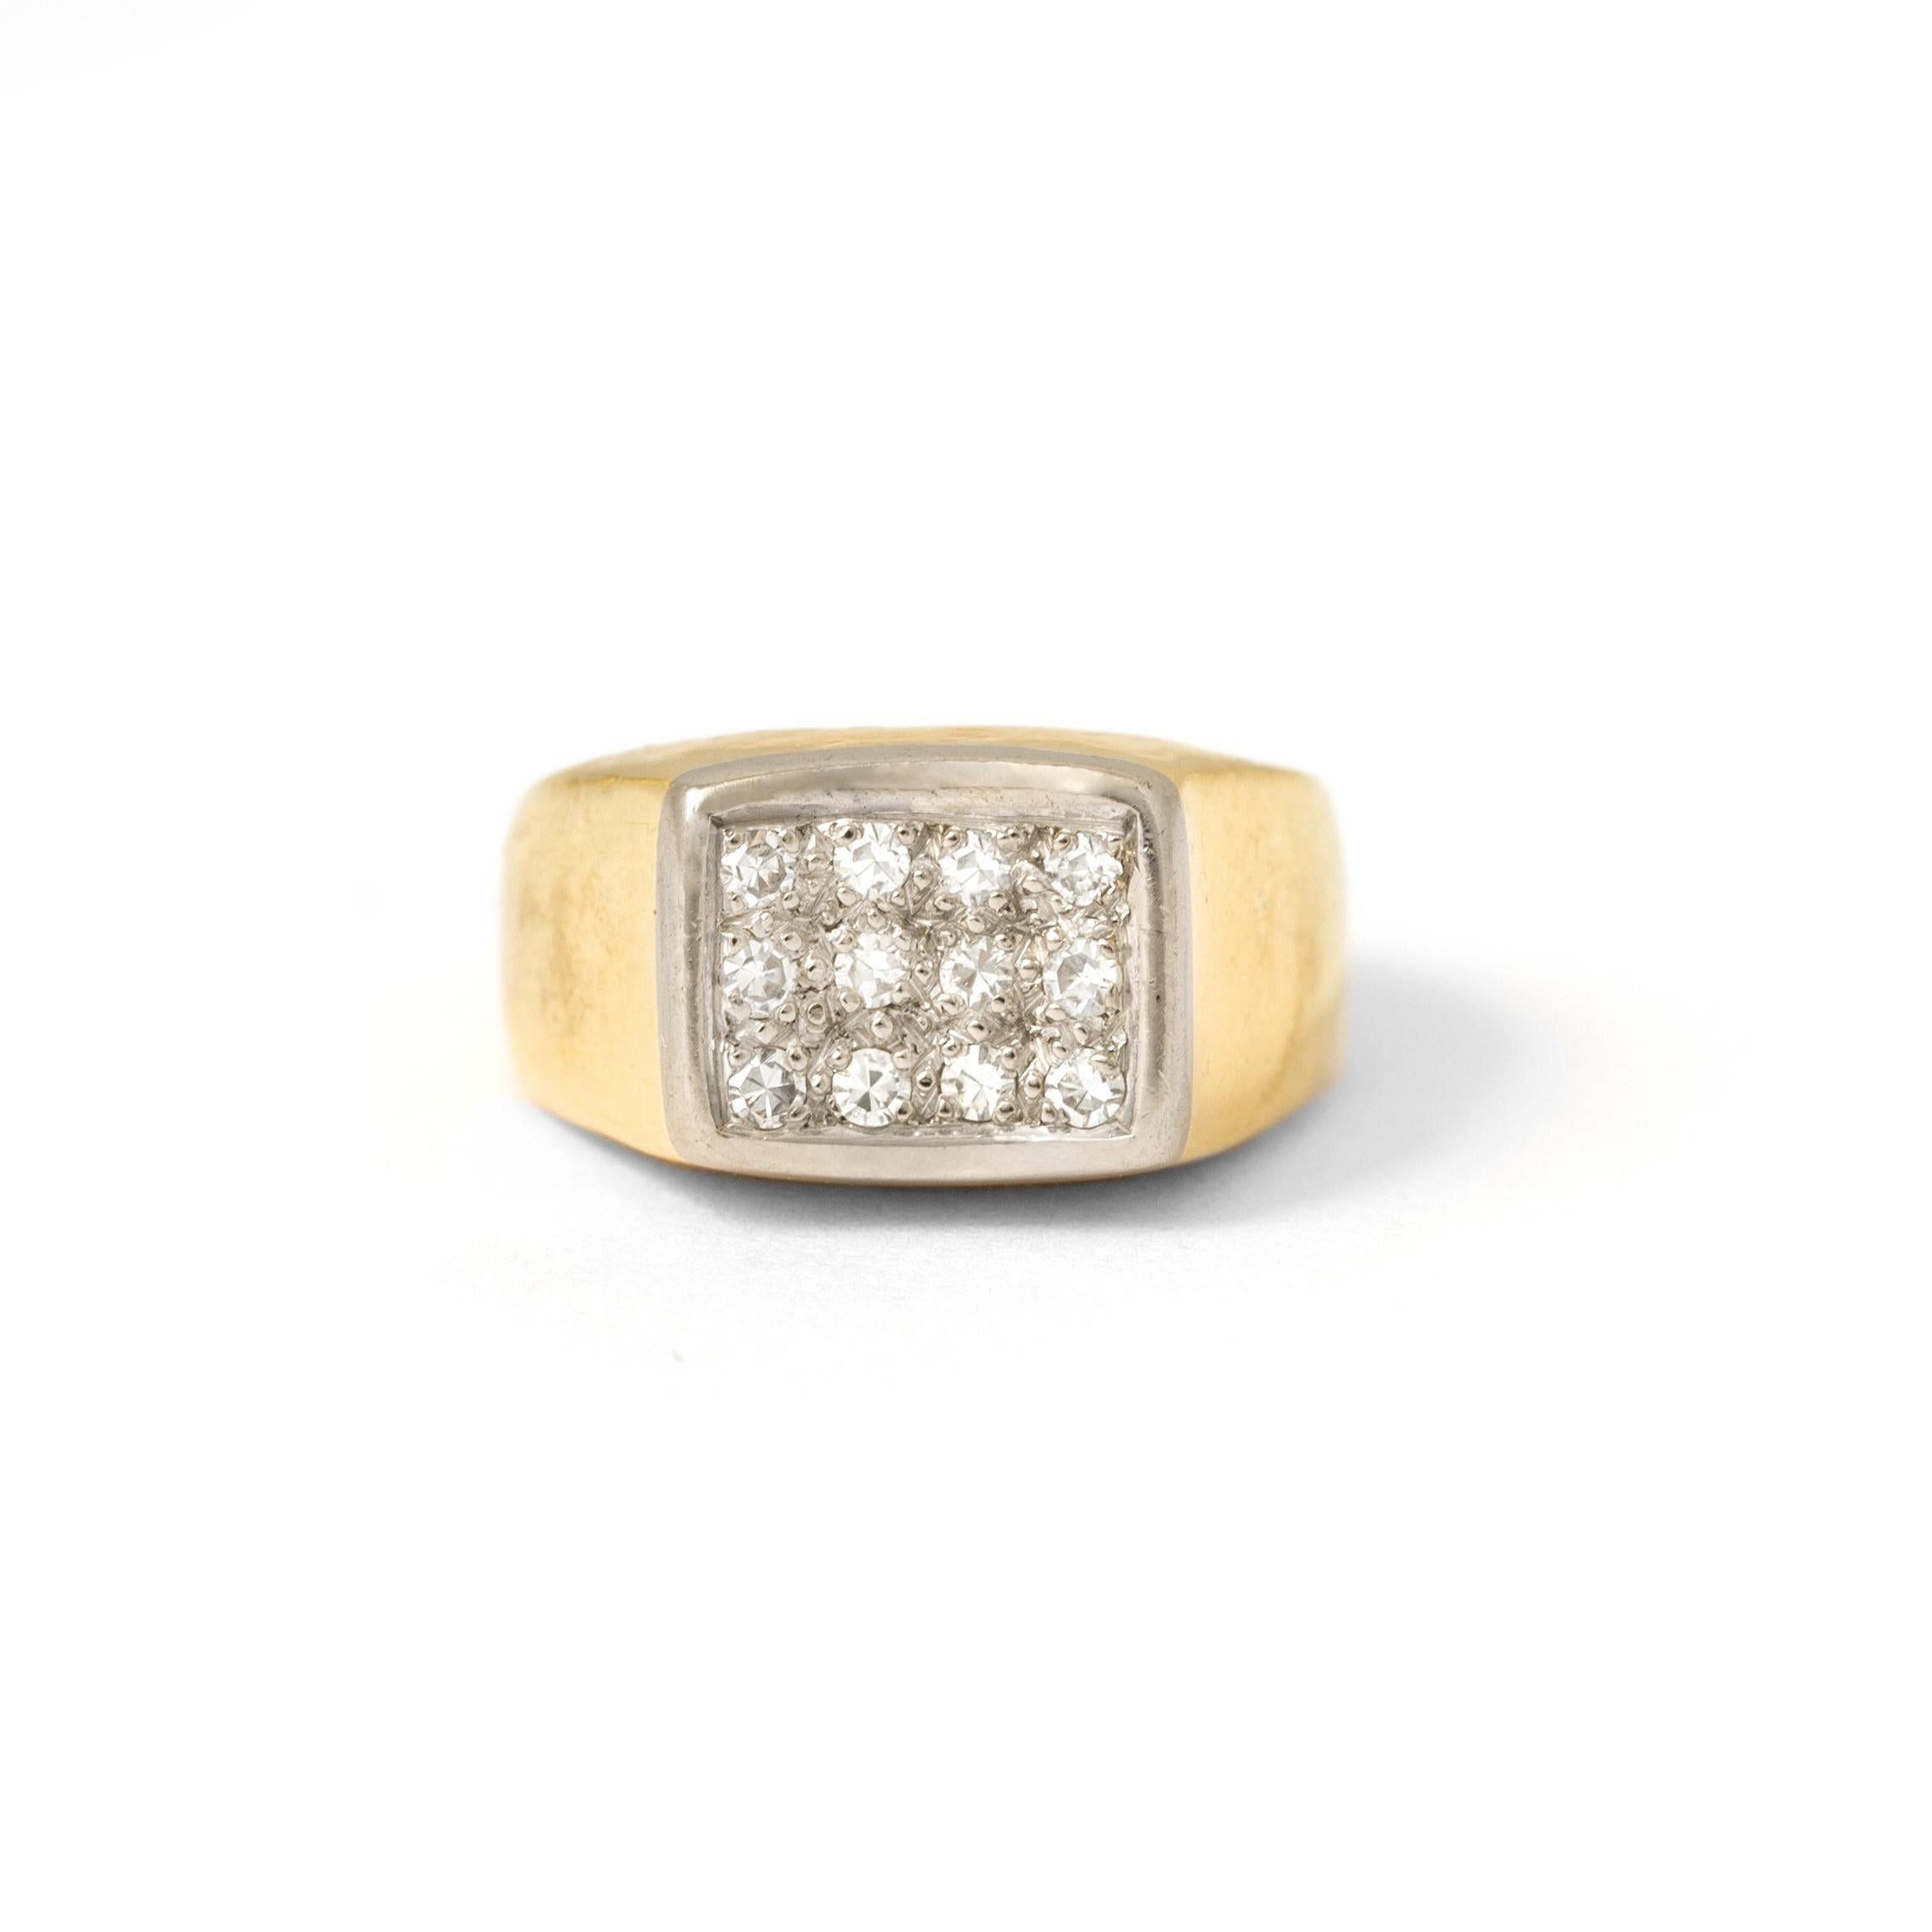 18K yellow and white gold ring with diamonds. 
Main pattern dimensions: 8.37 x 10.03 mm. 
Size: 43.5. 
Gross weight: 5.36 grams.